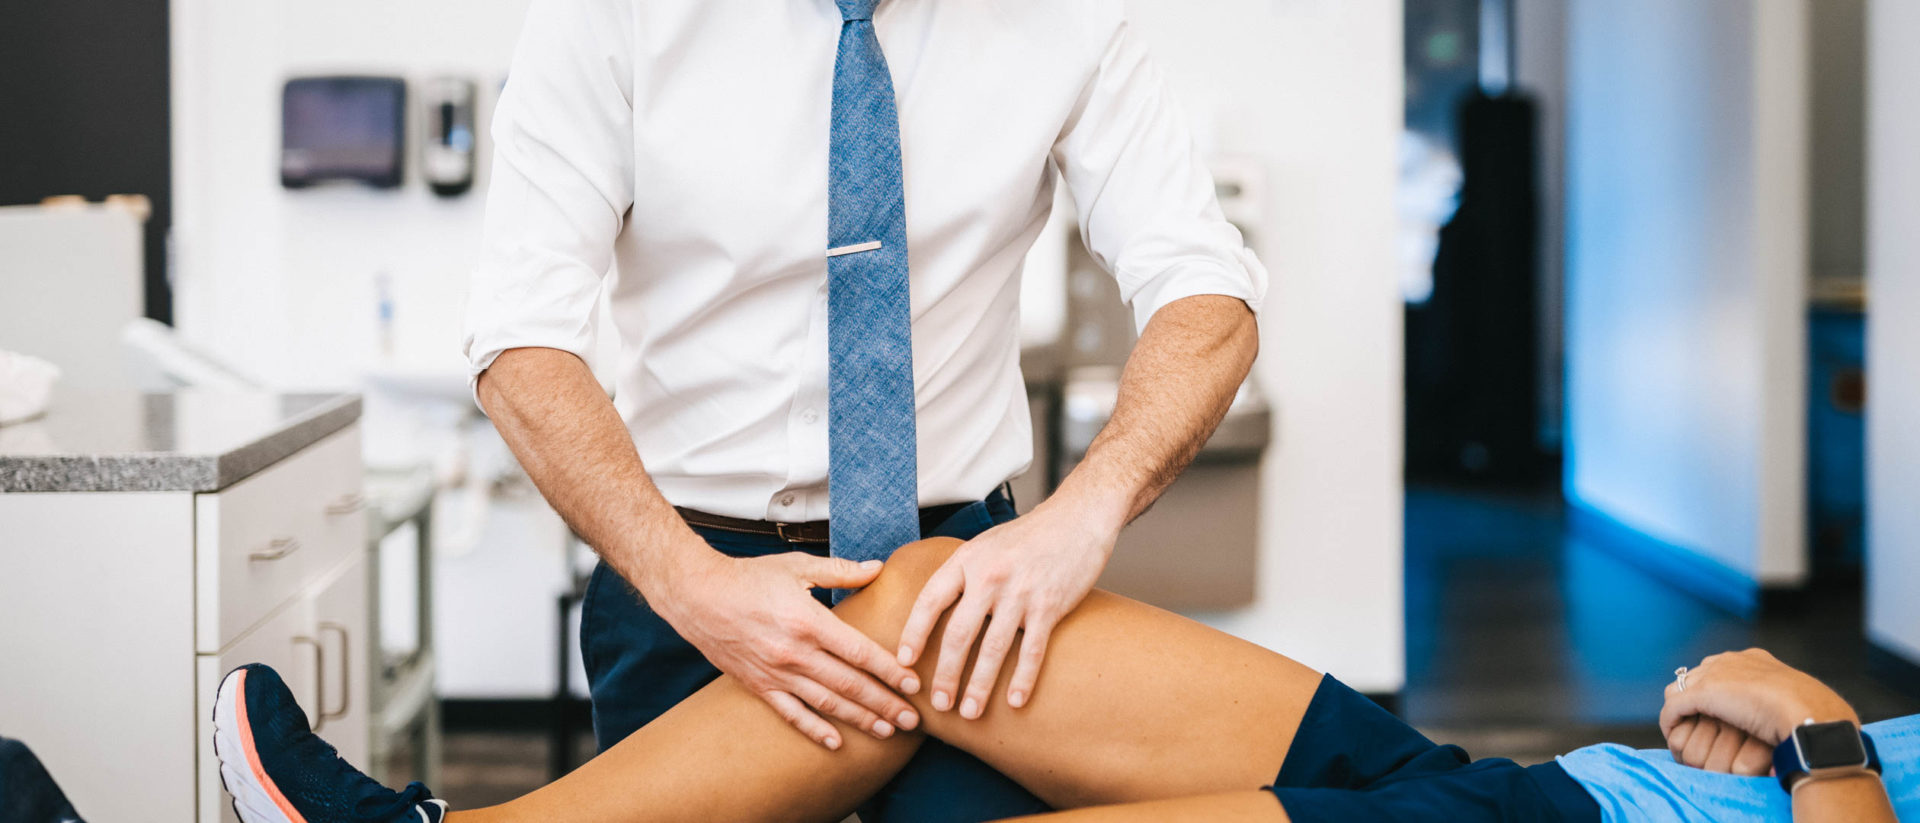 Physical therapist treating knee pain